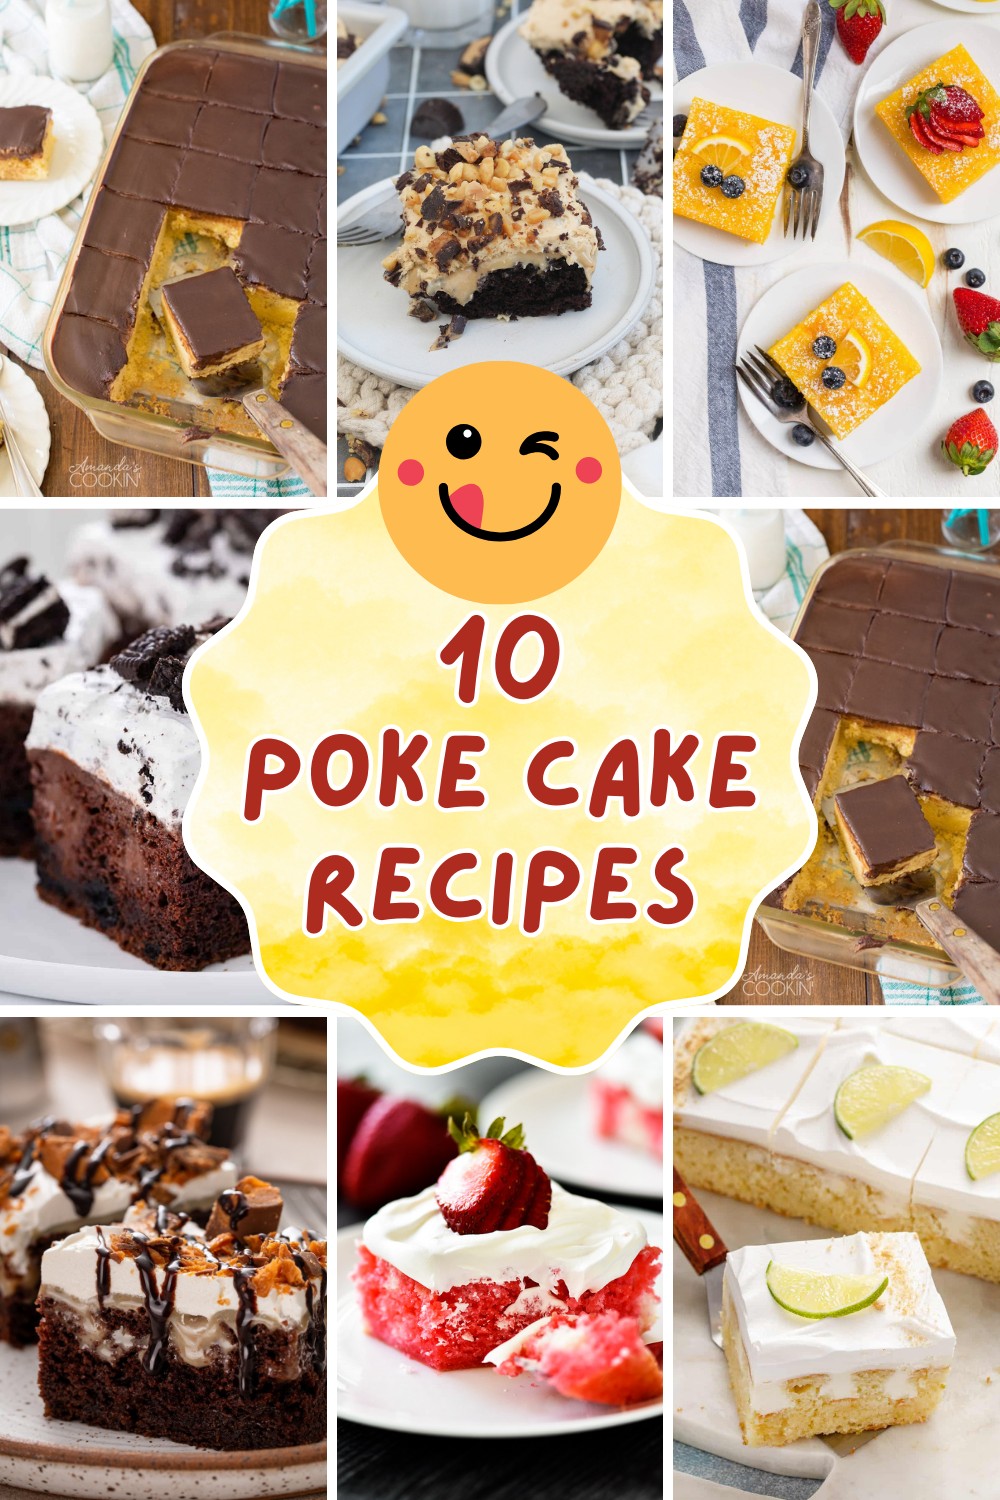 Get ready to indulge! 🎂 Check out our roundup of 10 delicious poke cake recipes that will make your taste buds dance. Perfect for any sweet occasion! 🍰 #PokeCake #BakingJoy #SweetTooth